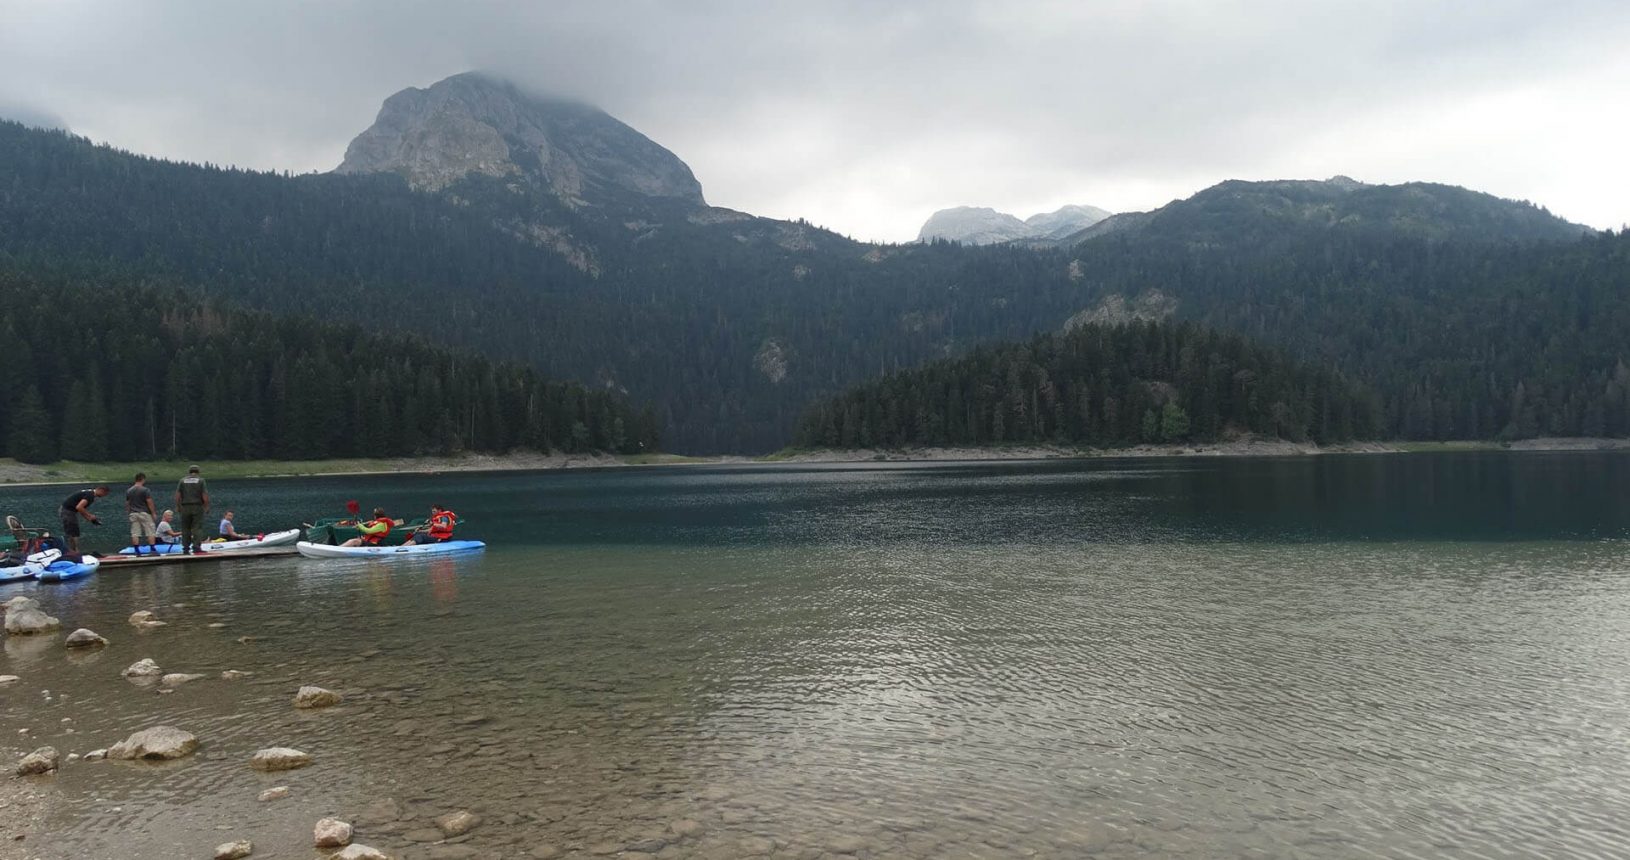 Riding a boat on the black lake National Park Durmitor